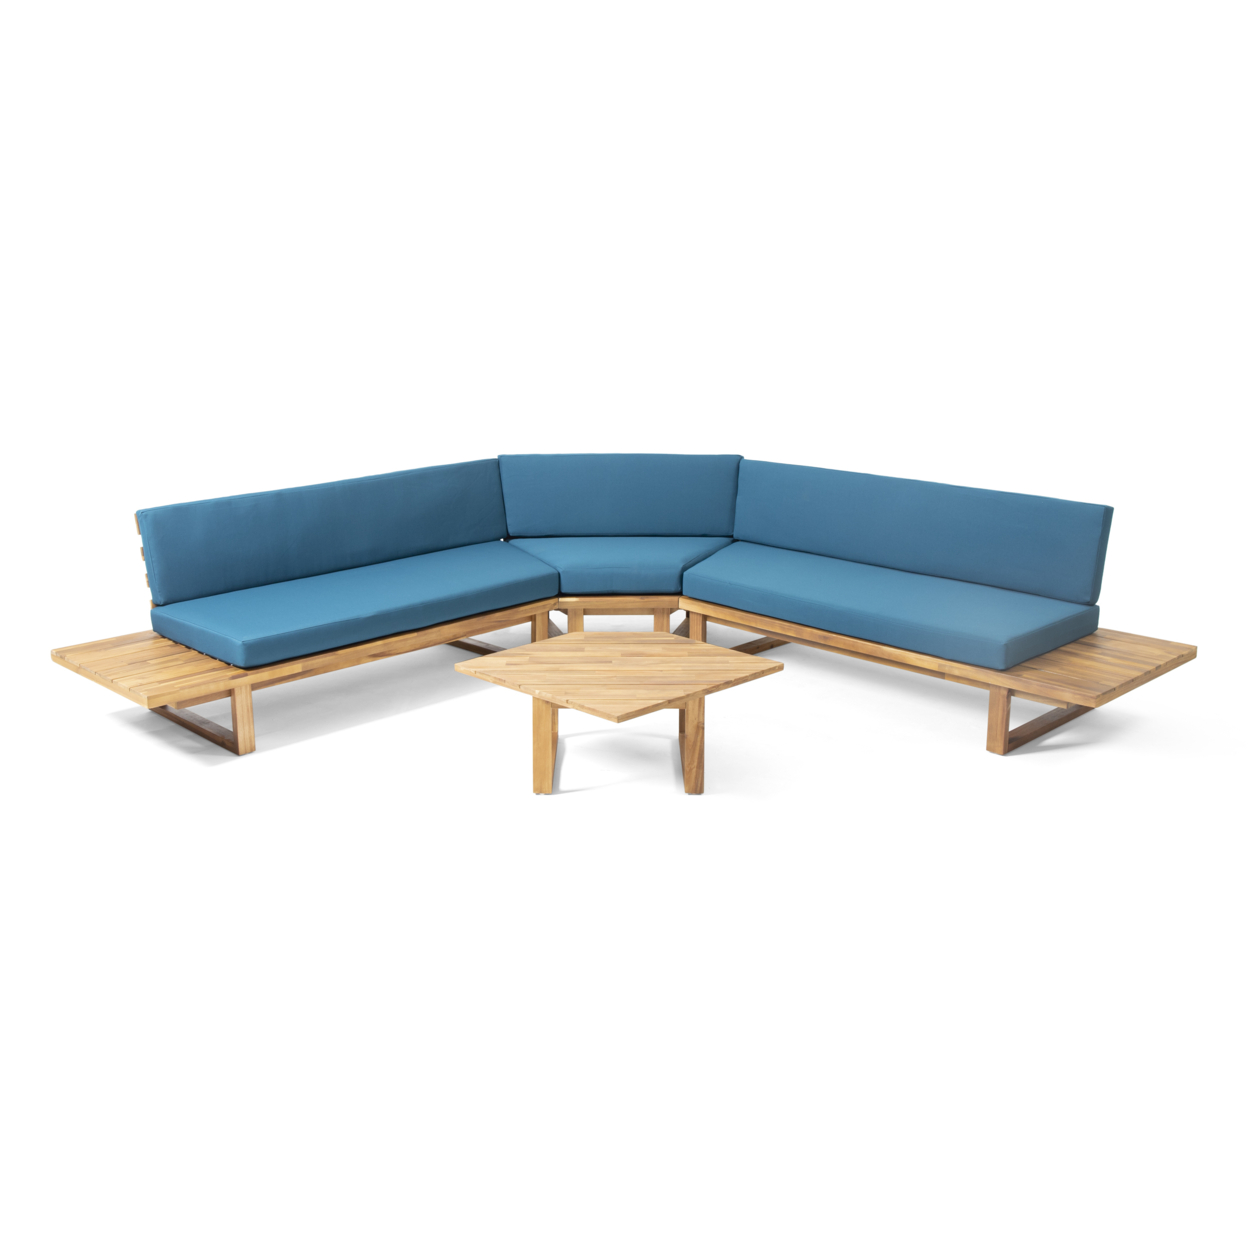 Aida Outdoor Acacia Wood 5 Seater Sectional Sofa Set With Water-Resistant Cushions - Teak Finish + Dark Teal